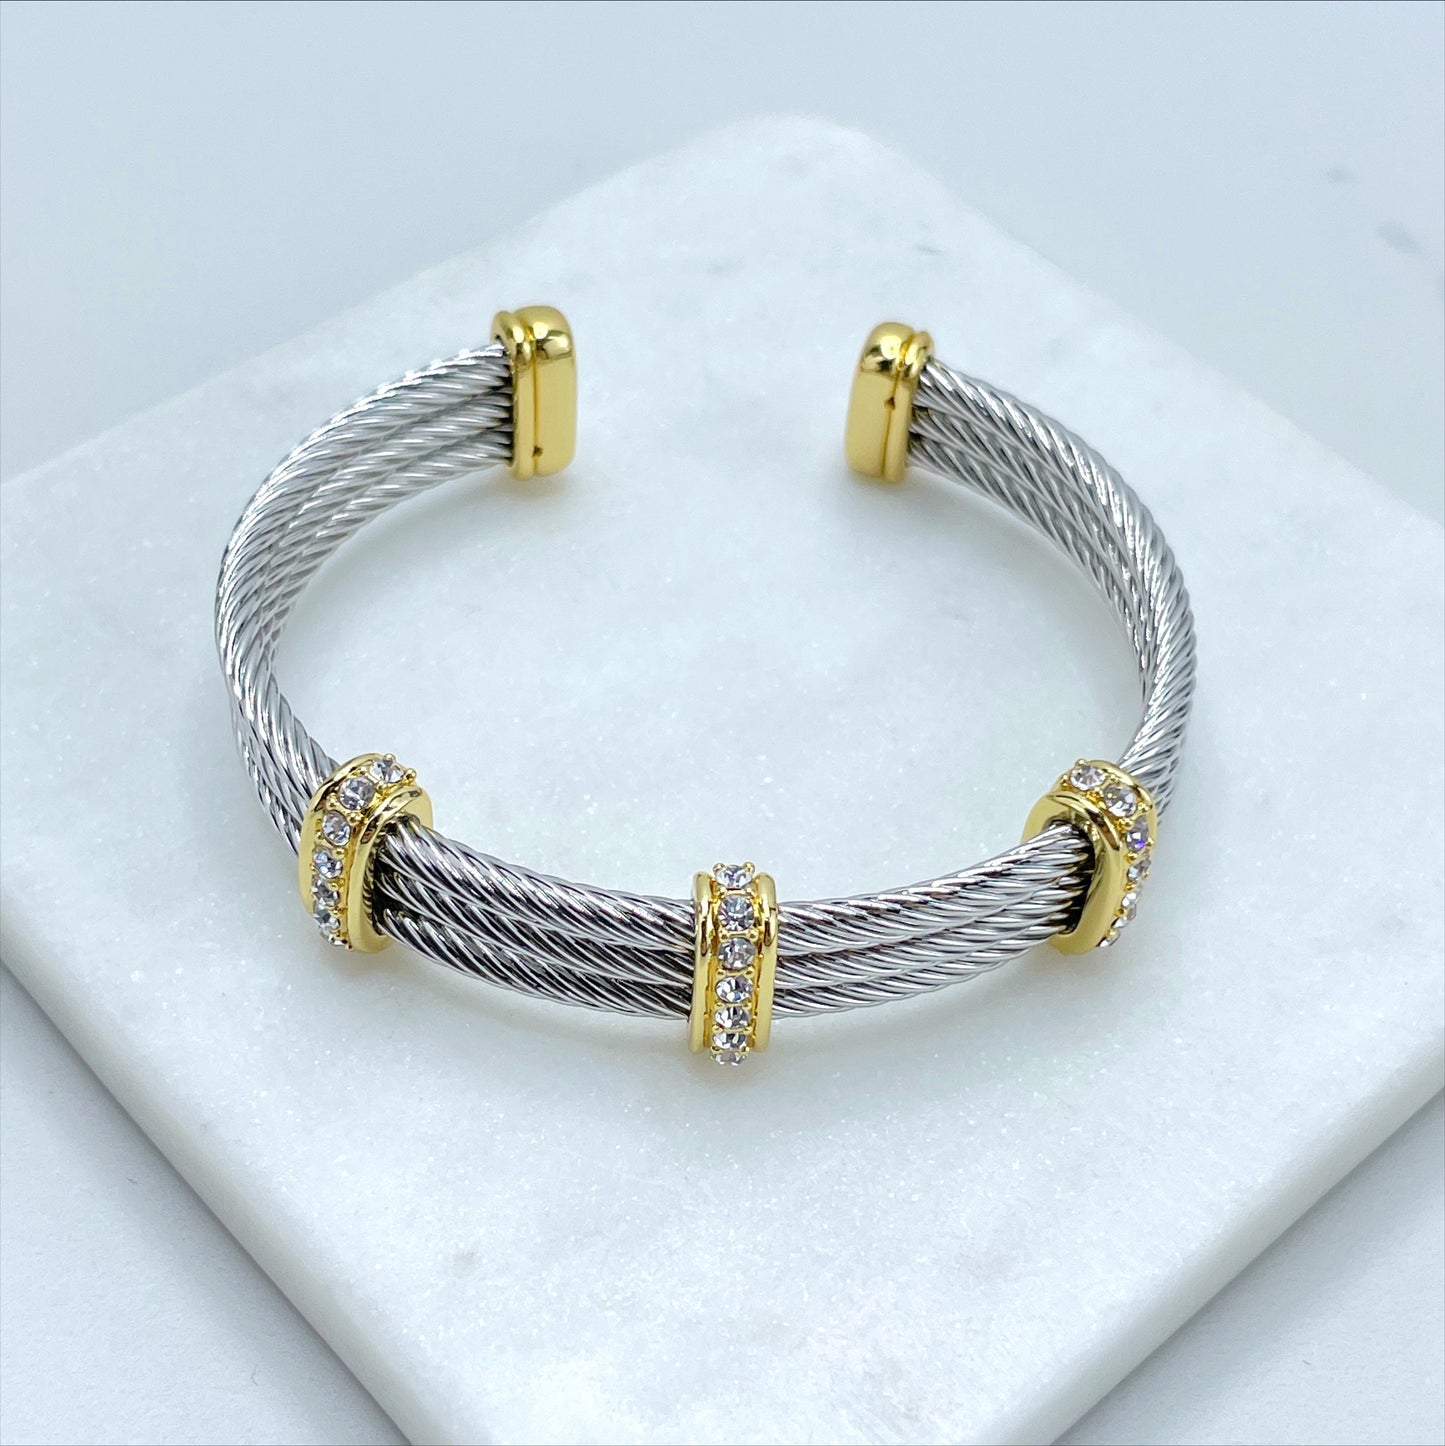 18k Gold Filled with Cubic Zirconia and White Gold Filled Texturized Twisted Waves Cuff Bracelet Wholesale Jewelry Making Supplies